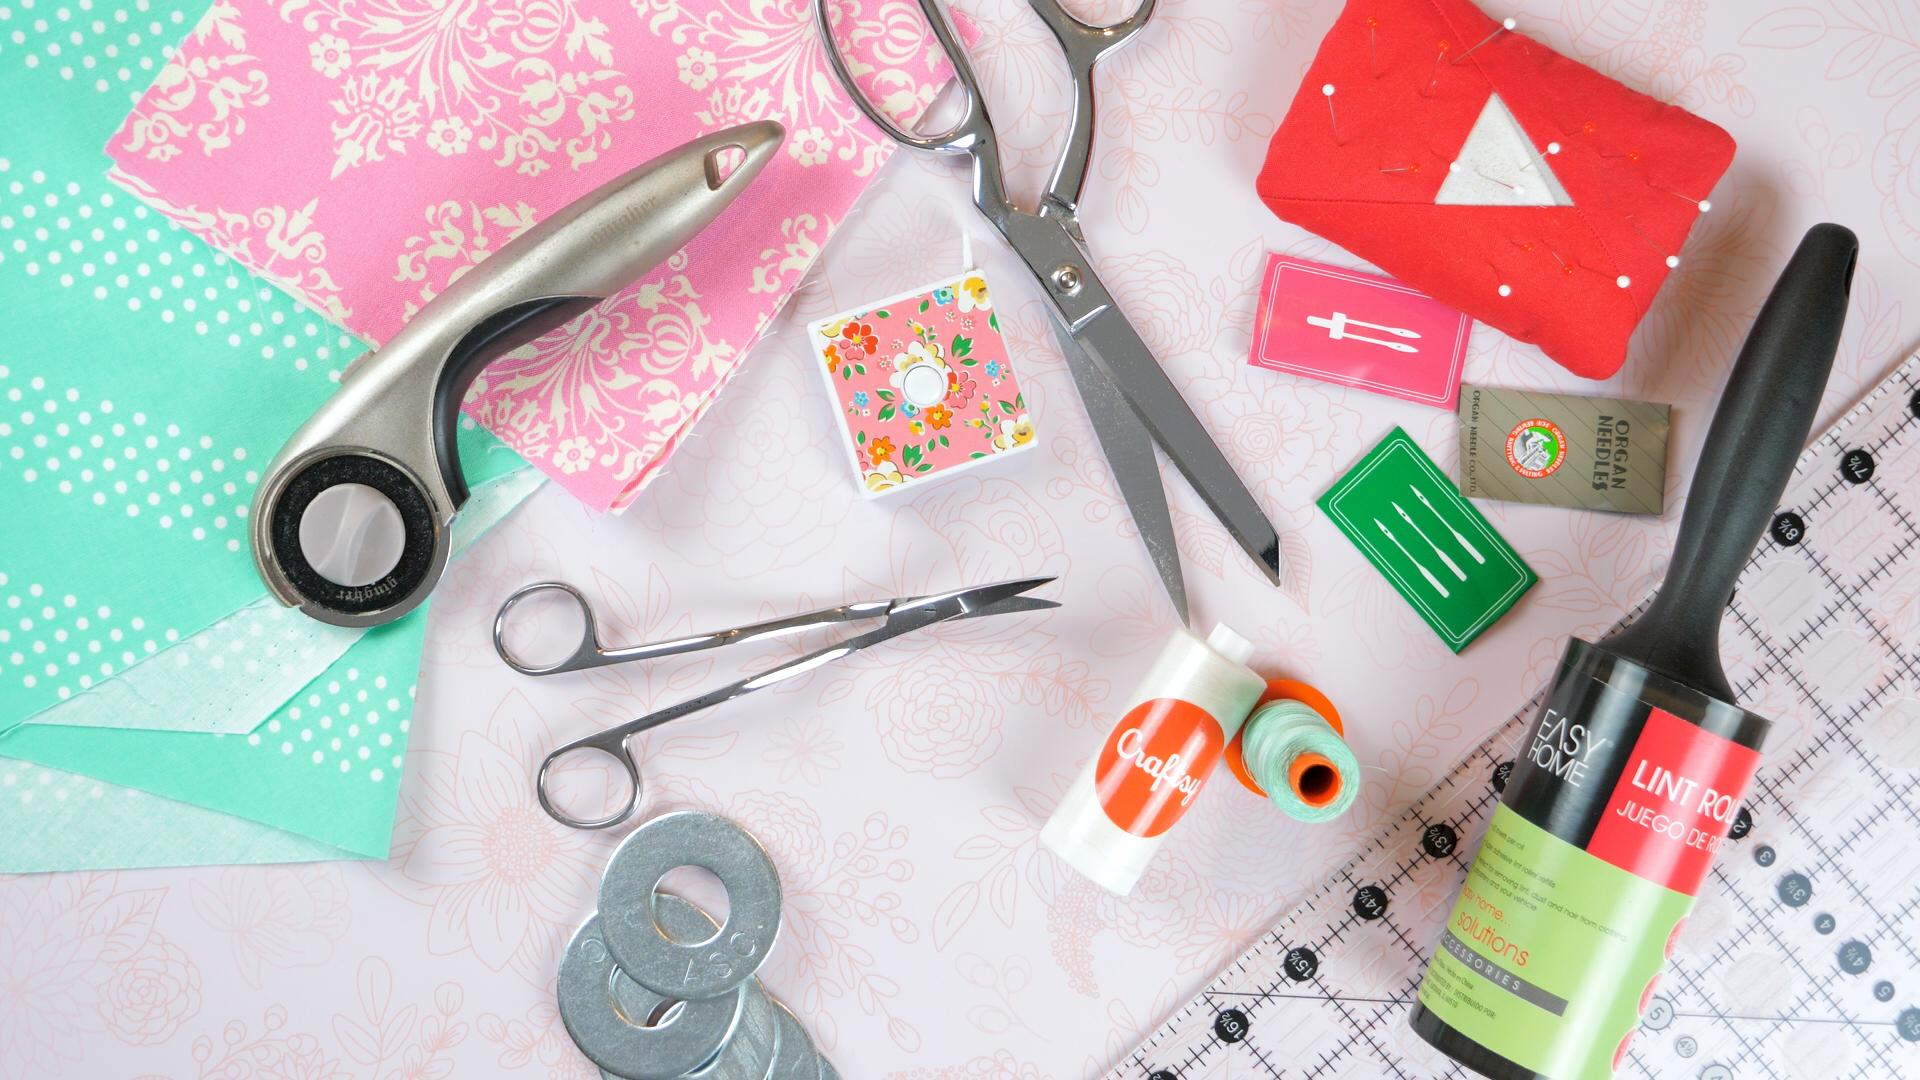 What Basic Sewing Supplies Do You Need to Get Started? – Sewing Report